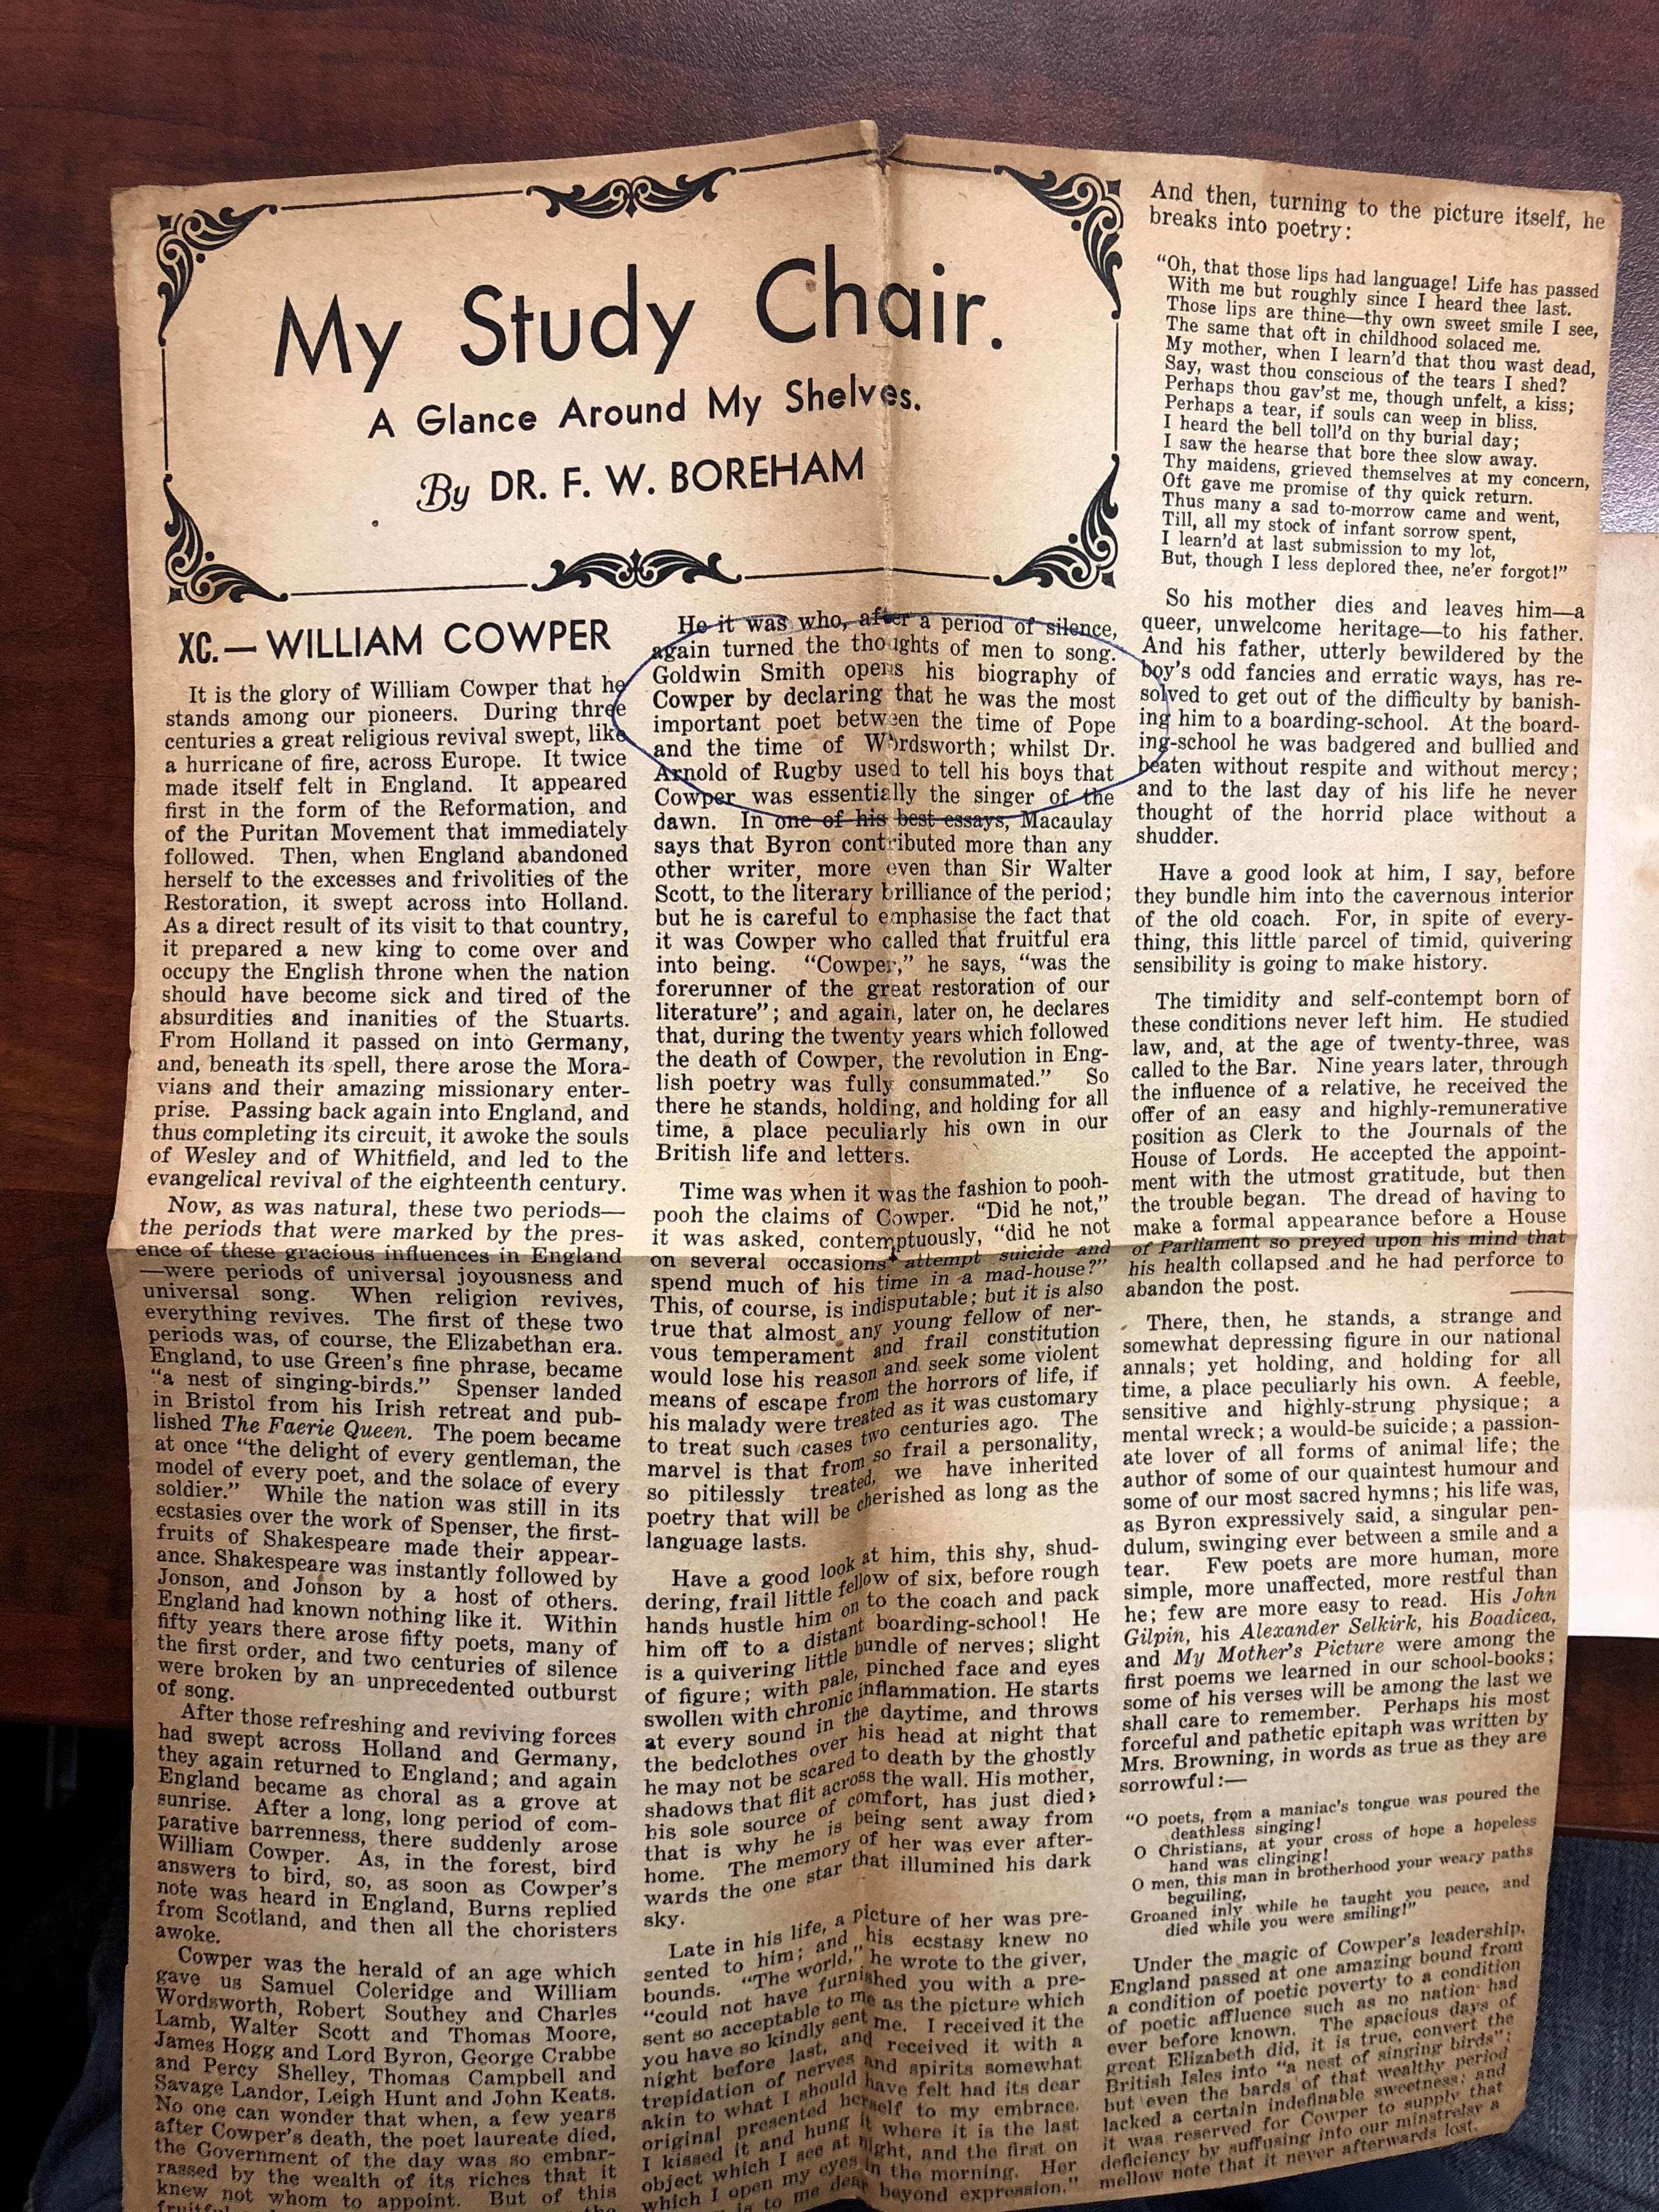 An example of one of Dr. Boreham's sermon-essays re-packaged for a popular Christian periodical